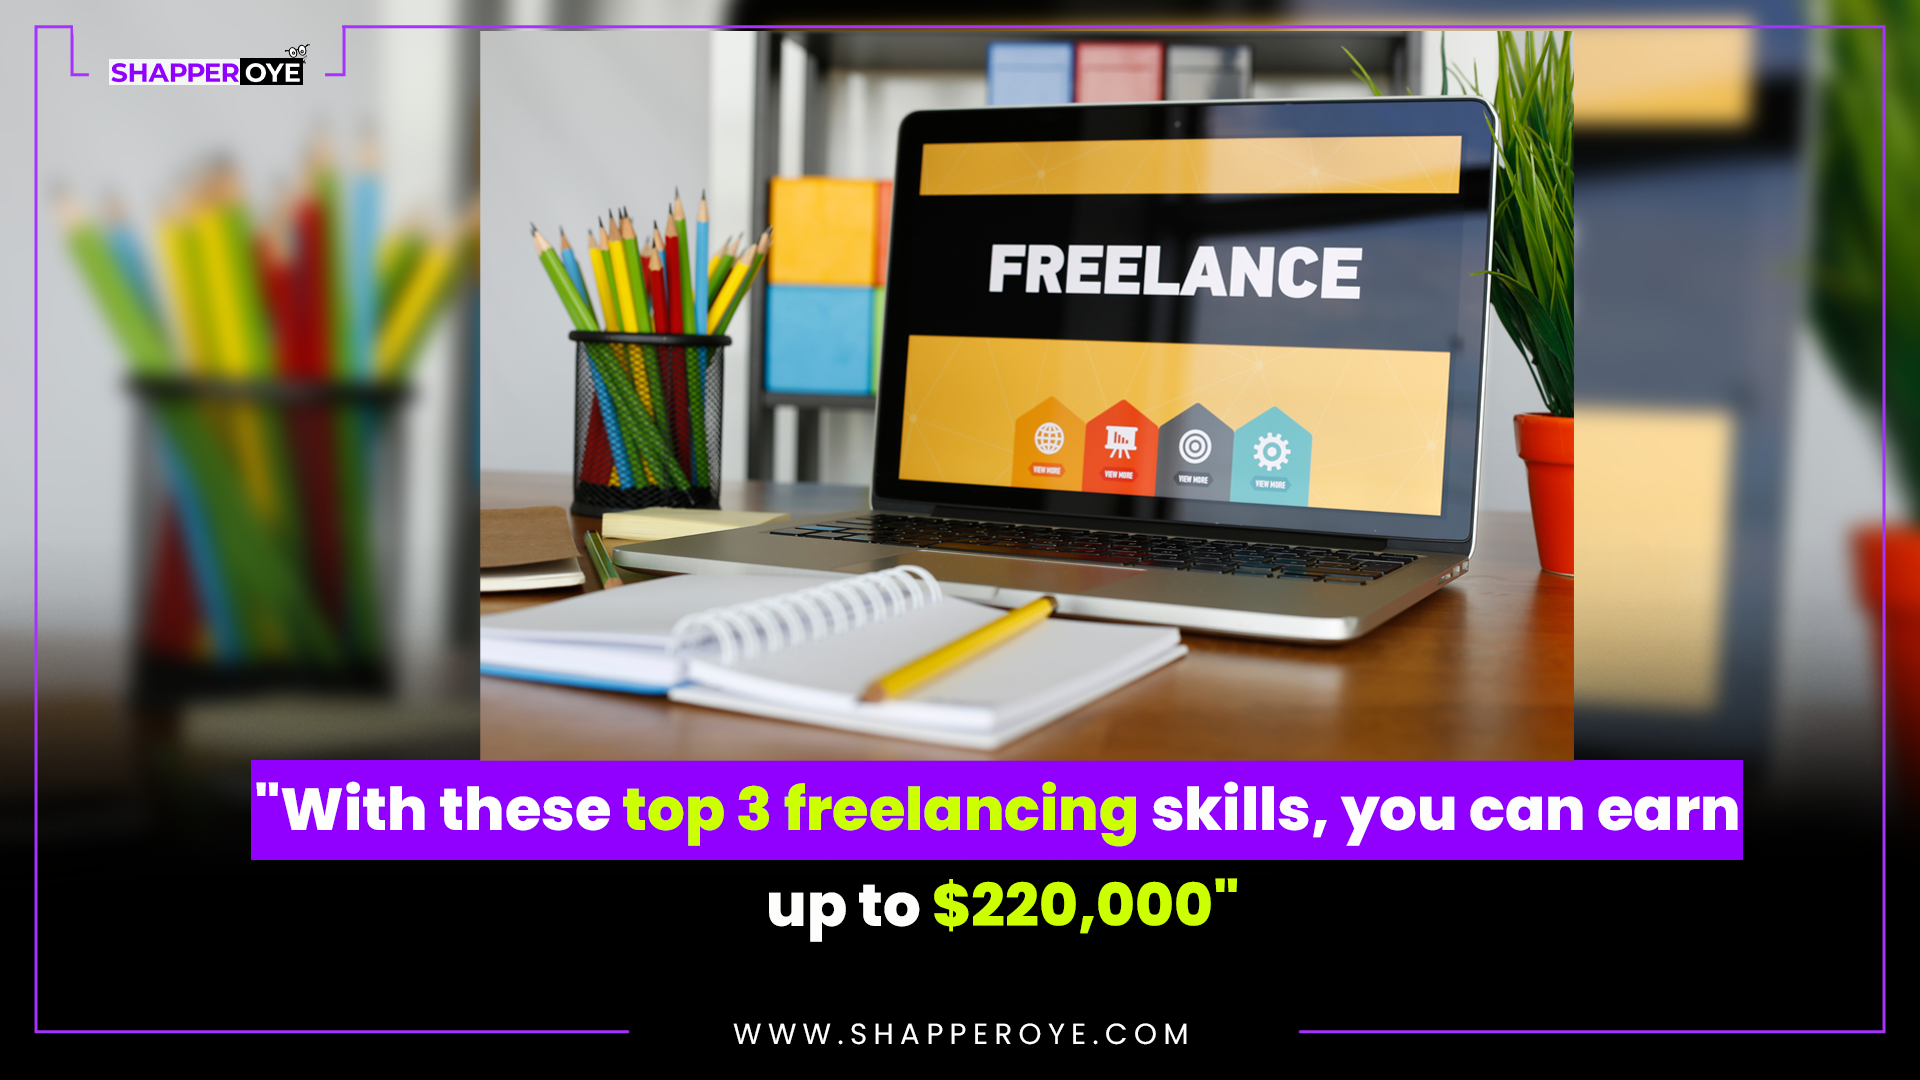 3 freelancing skills, you can earn up to $220,000"